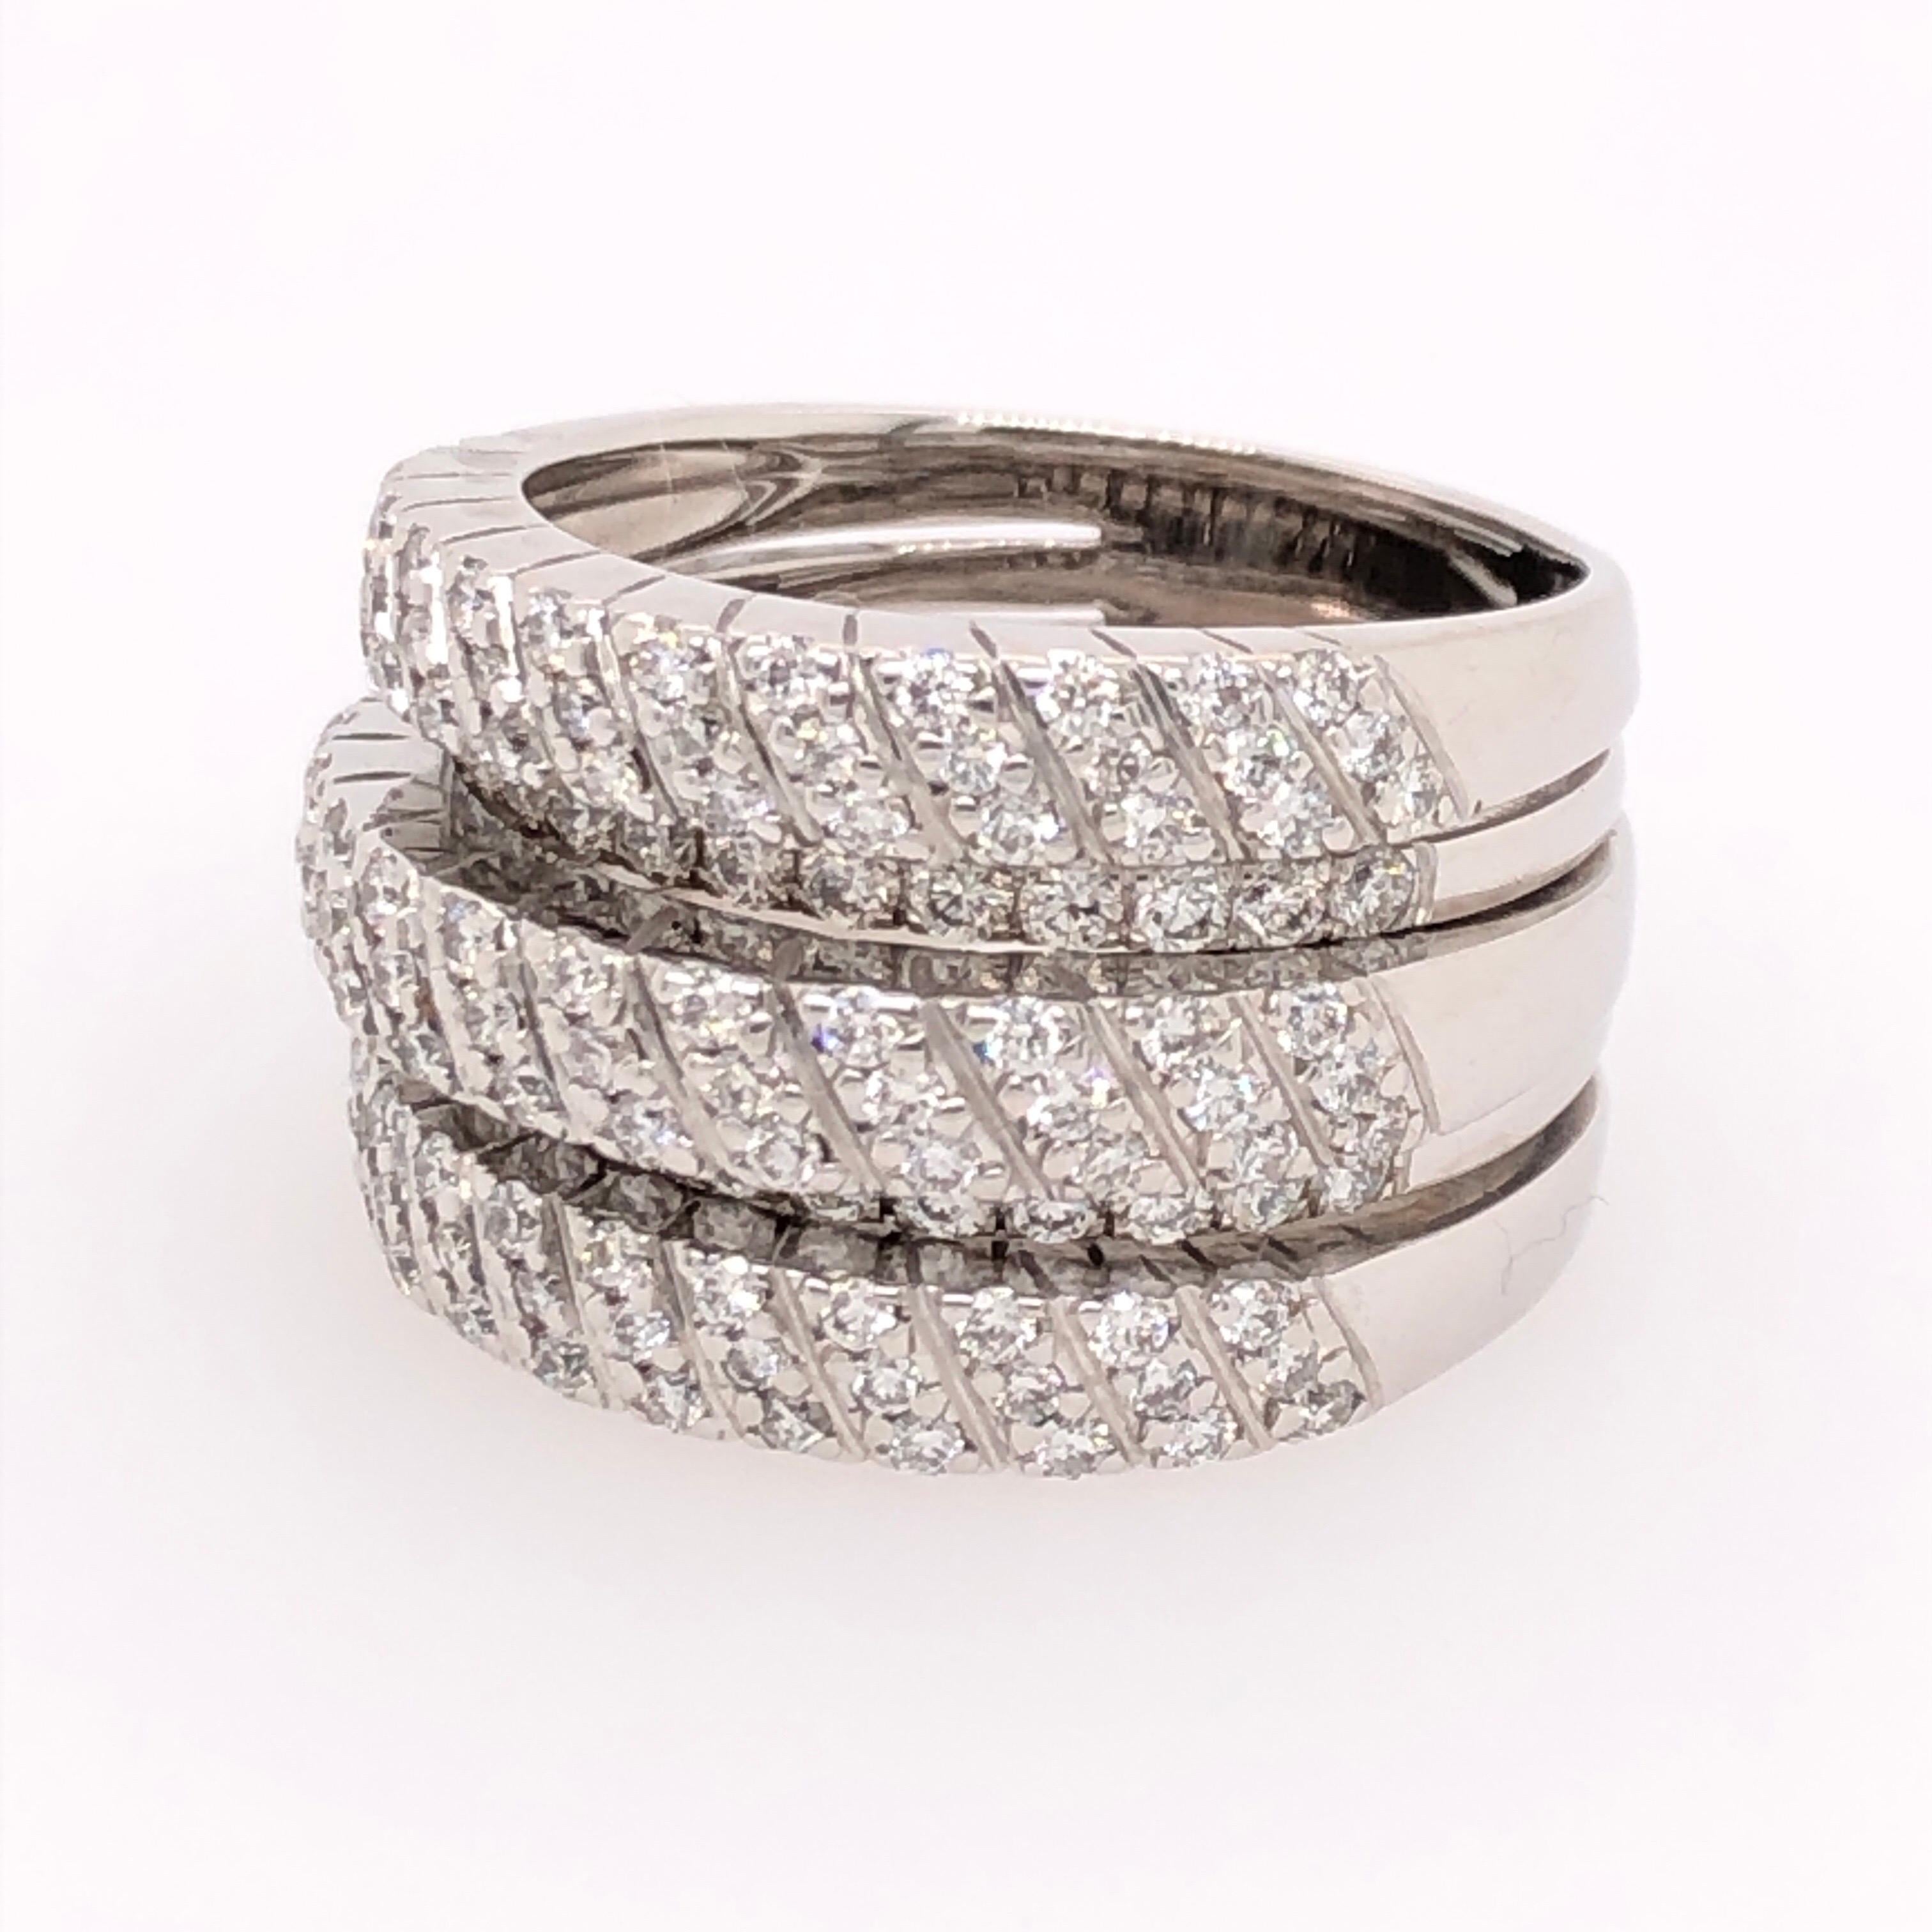 If your looking for a show stopping piece this is it. Our 18 karat white gold five band 1.6CT of pave diamonds ring is sure to turn heads!

Size: 7.5